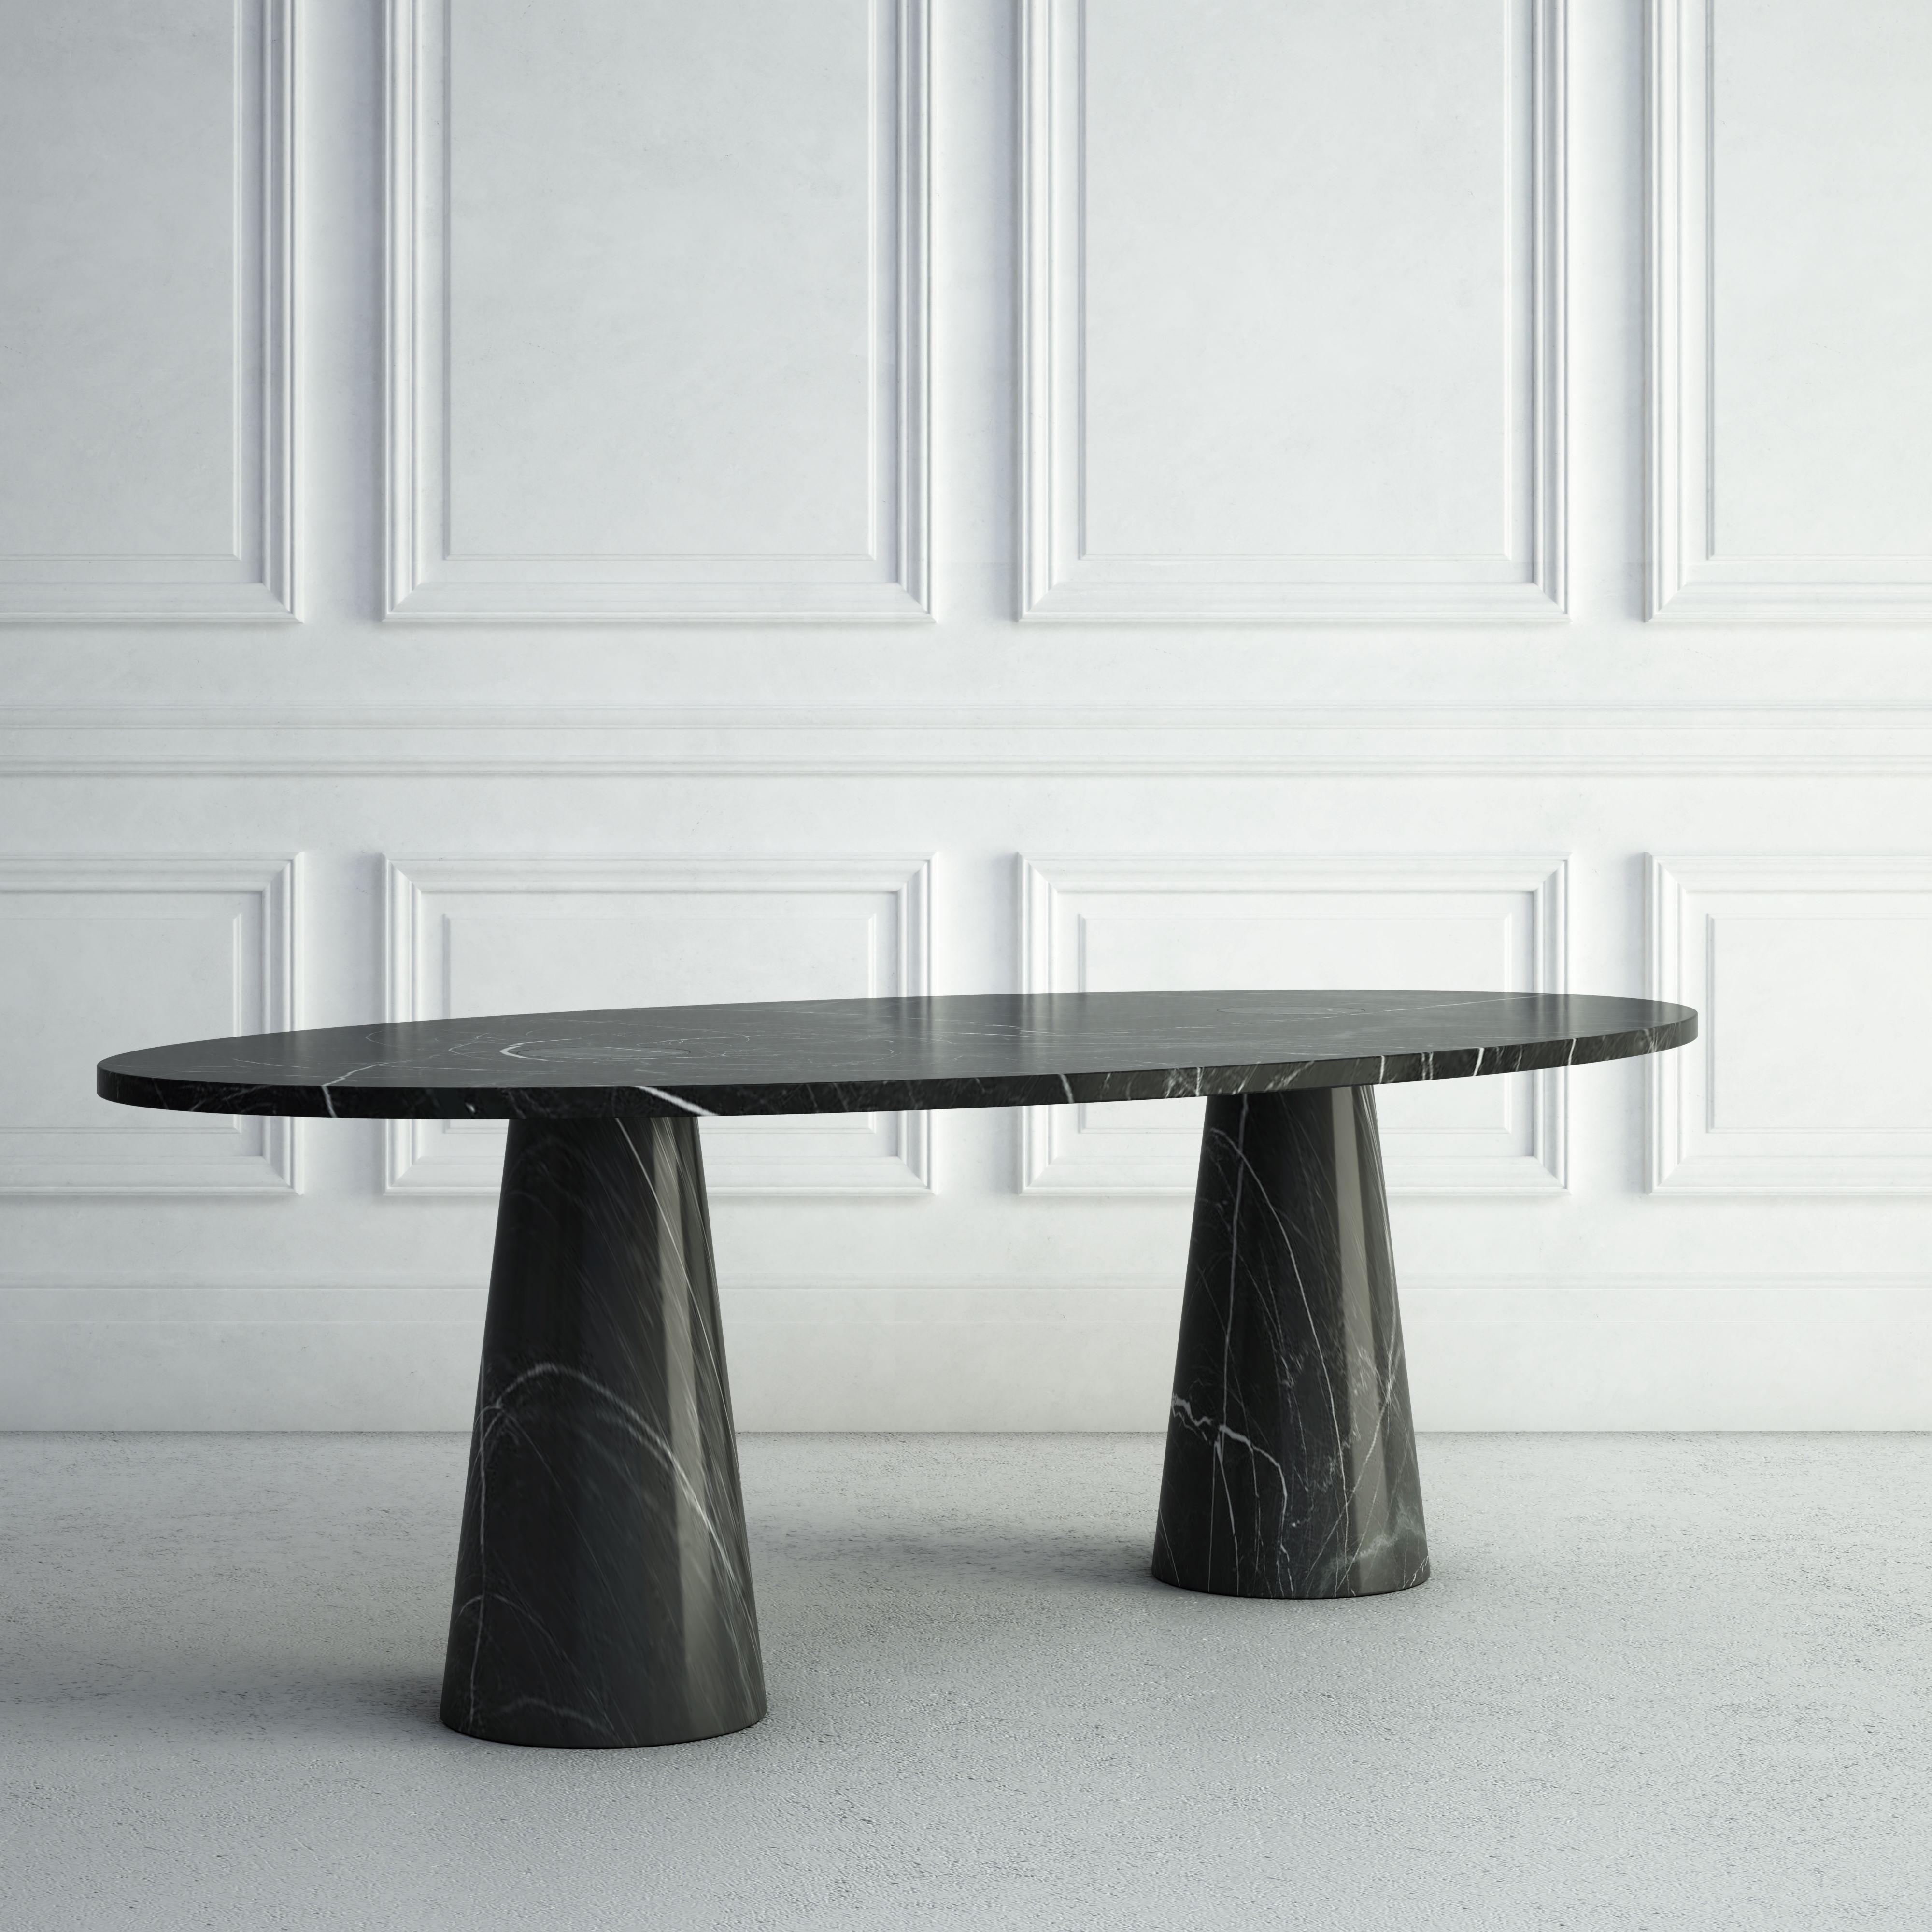 The Amandine is a bold modern dining table.  The top is made from an elegant thin oval stone slab.  Each base is circular, but tapers up into a large conical shape supporting the top, giving the table a stylish but fun look.  The same stone is used